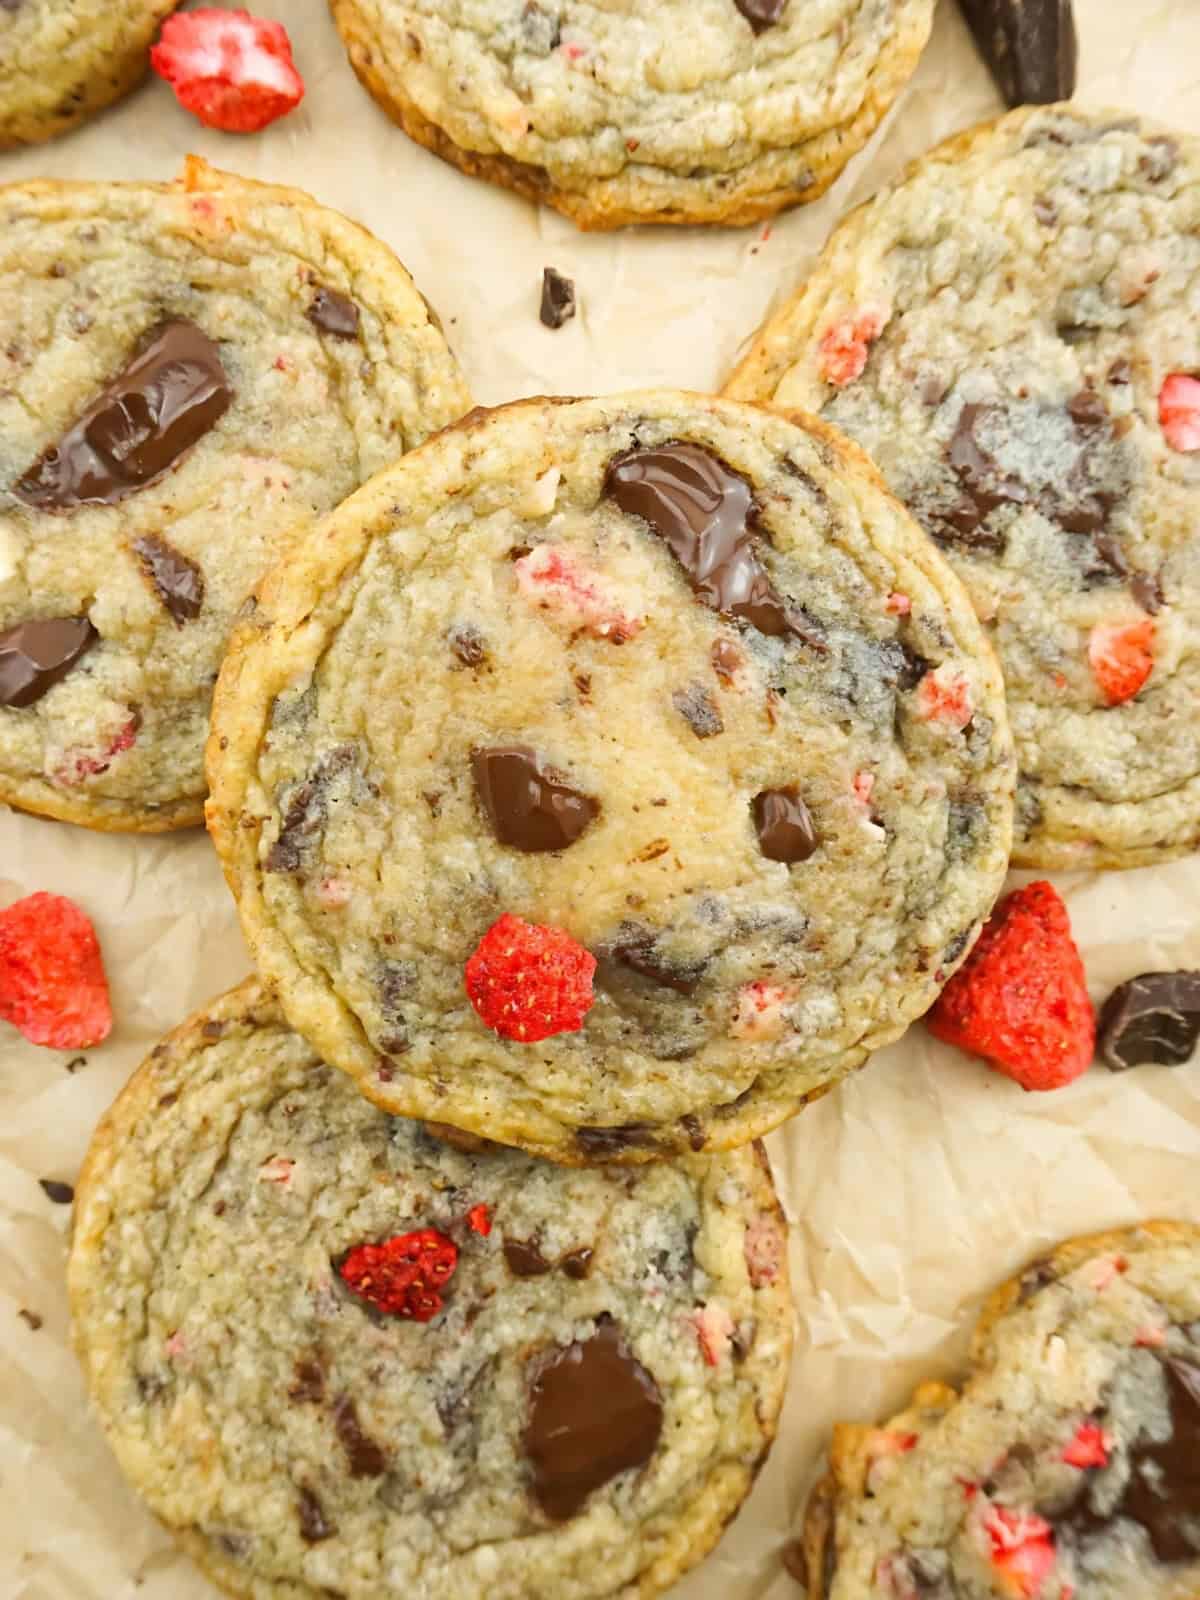 A batch of chocolate chunk strawberry cookies topped with slices of strawberries.